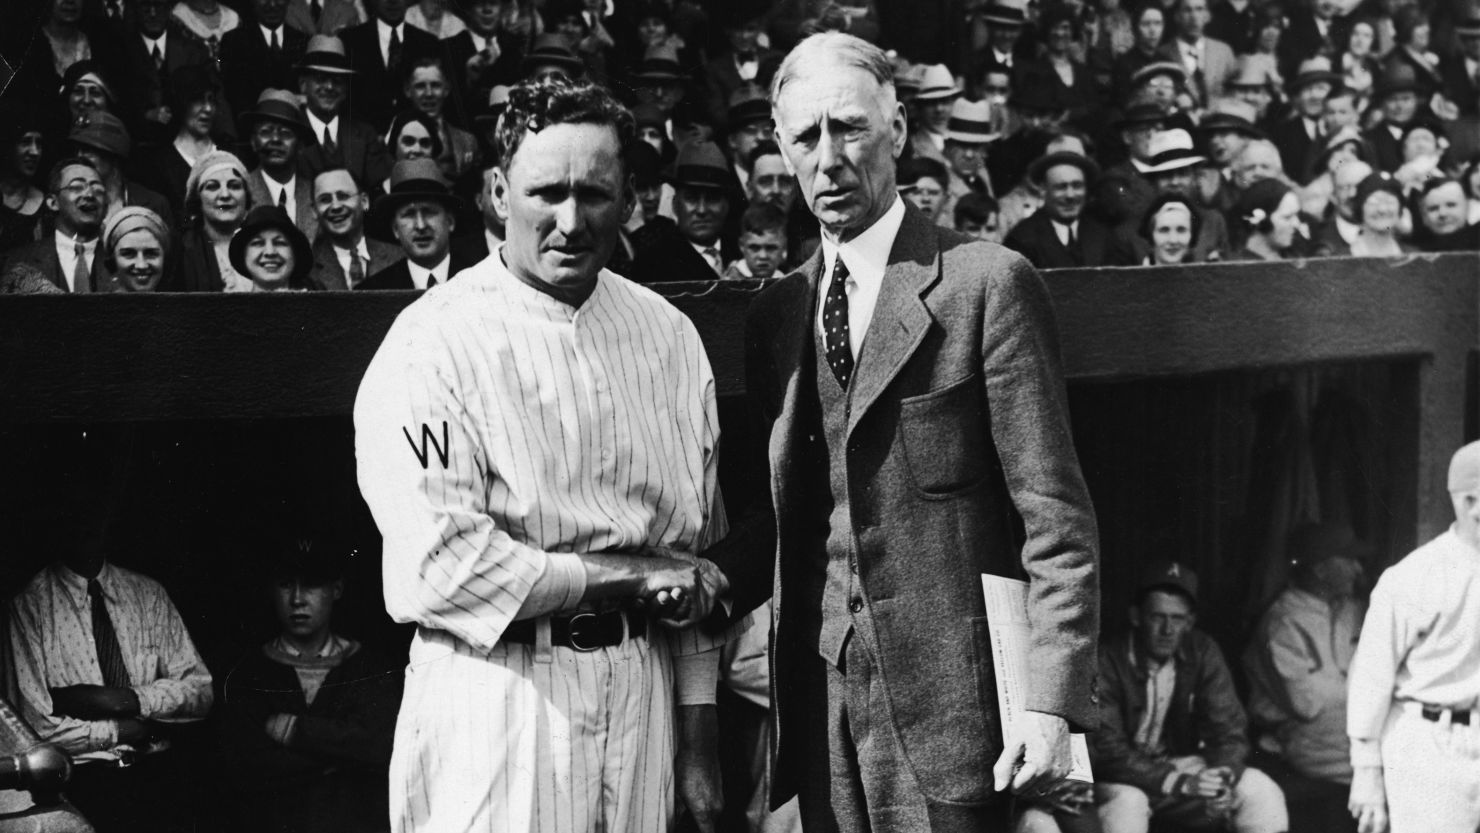 Wearing a suit, Philadelphia Athletics manager Connie Mack greets Walter Johnson, pitcher for the Washington Senators, in 1910.